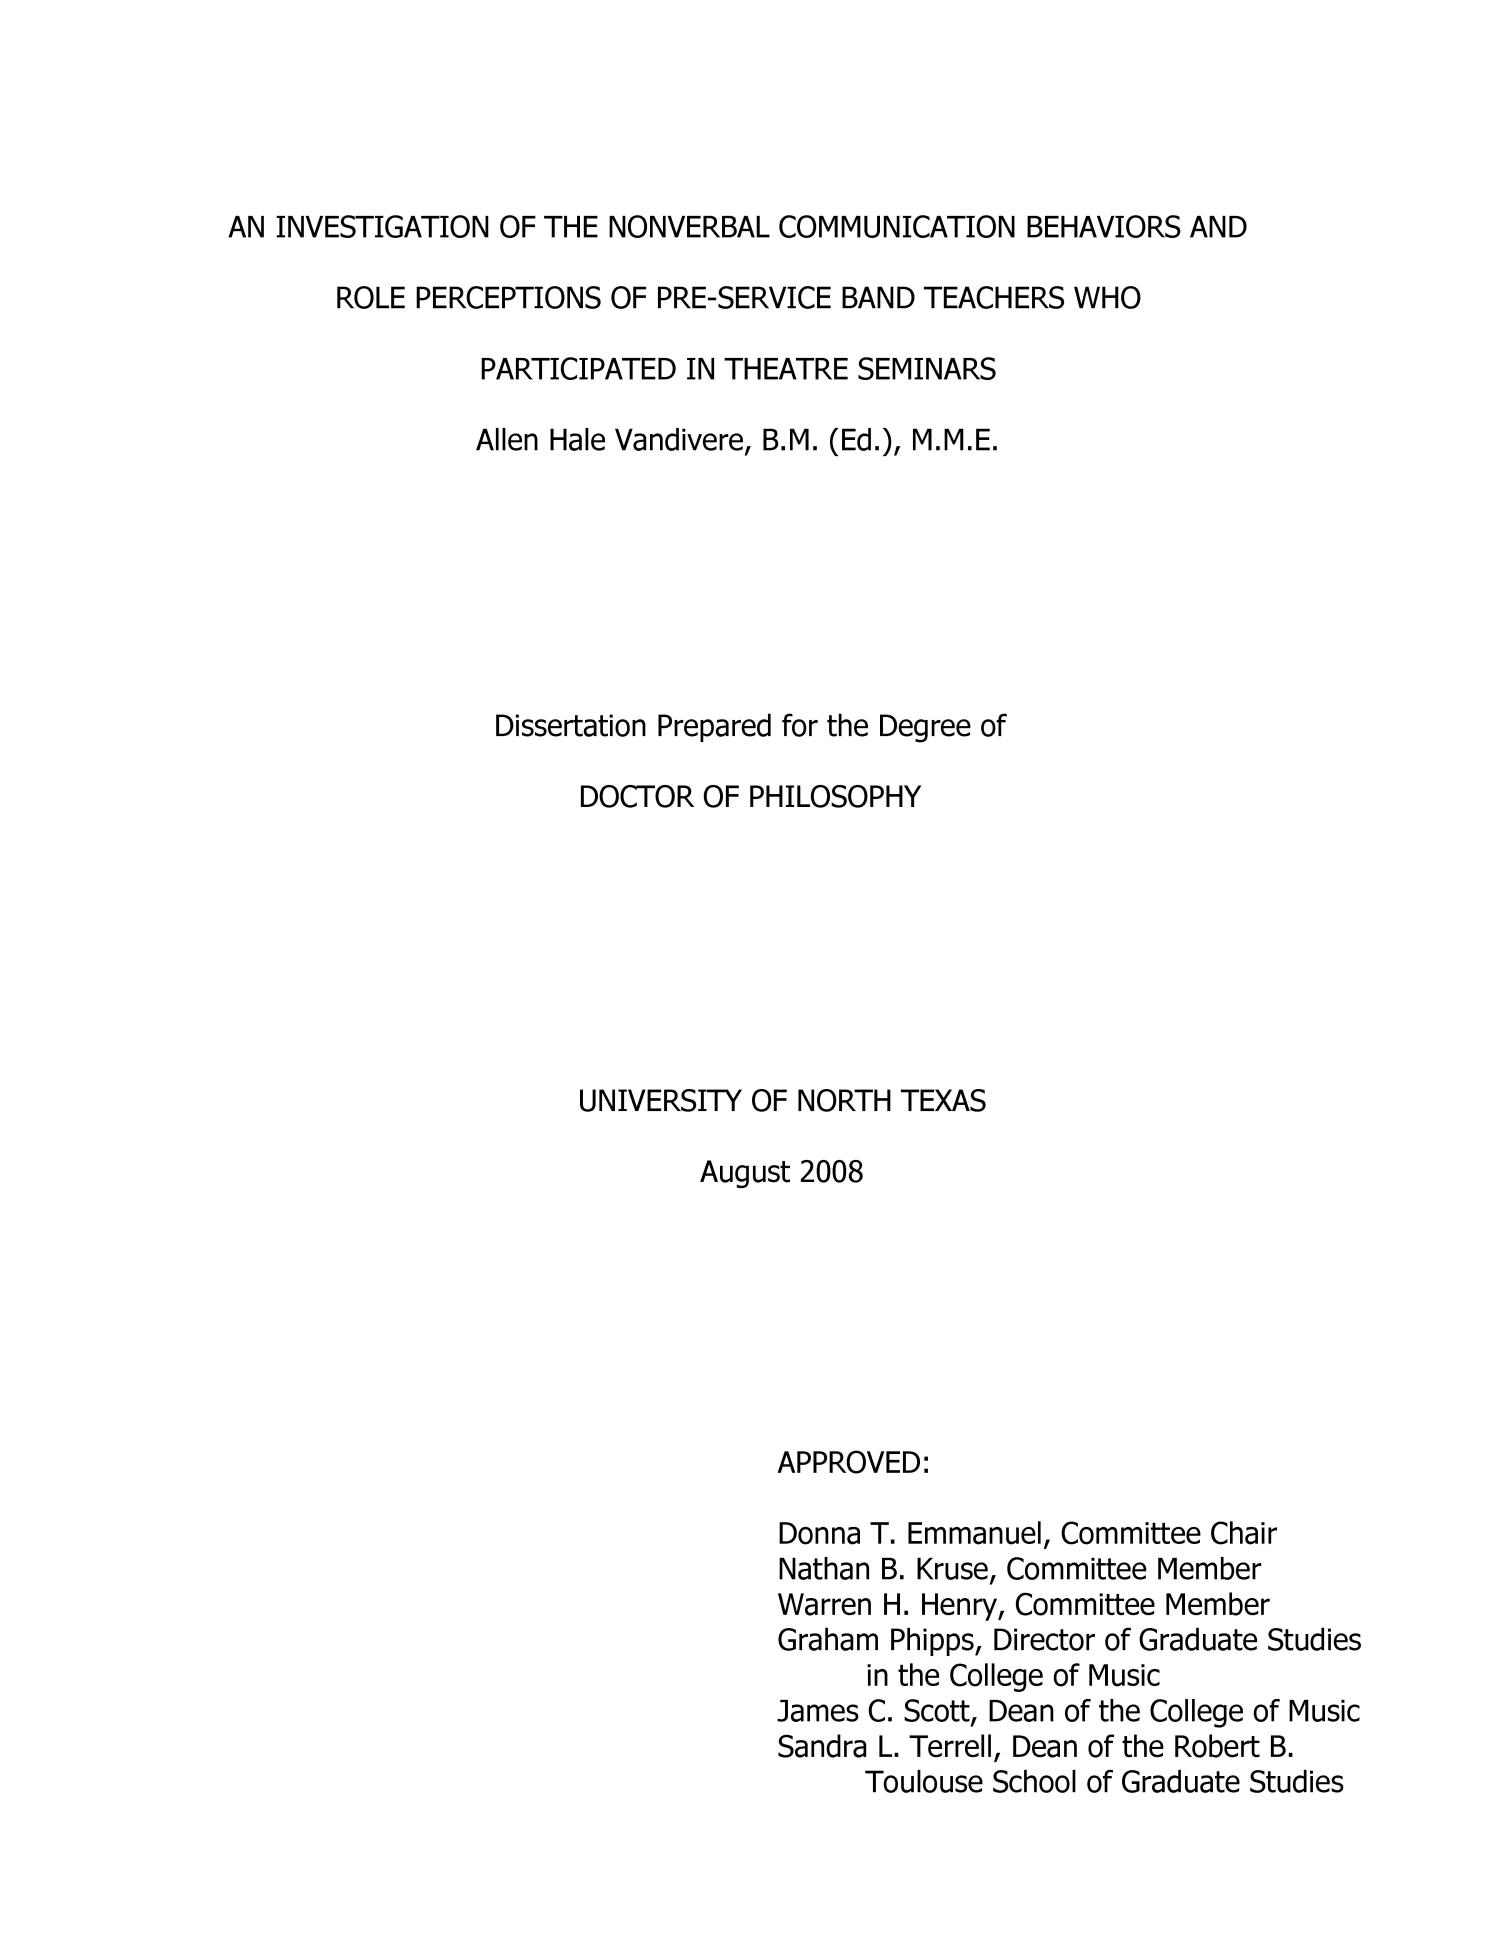 An Investigation of the Nonverbal Communication Behaviors and Role Perceptions of Pre-Service Band Teachers who Participated in Theatre Seminars
                                                
                                                    Title Page
                                                